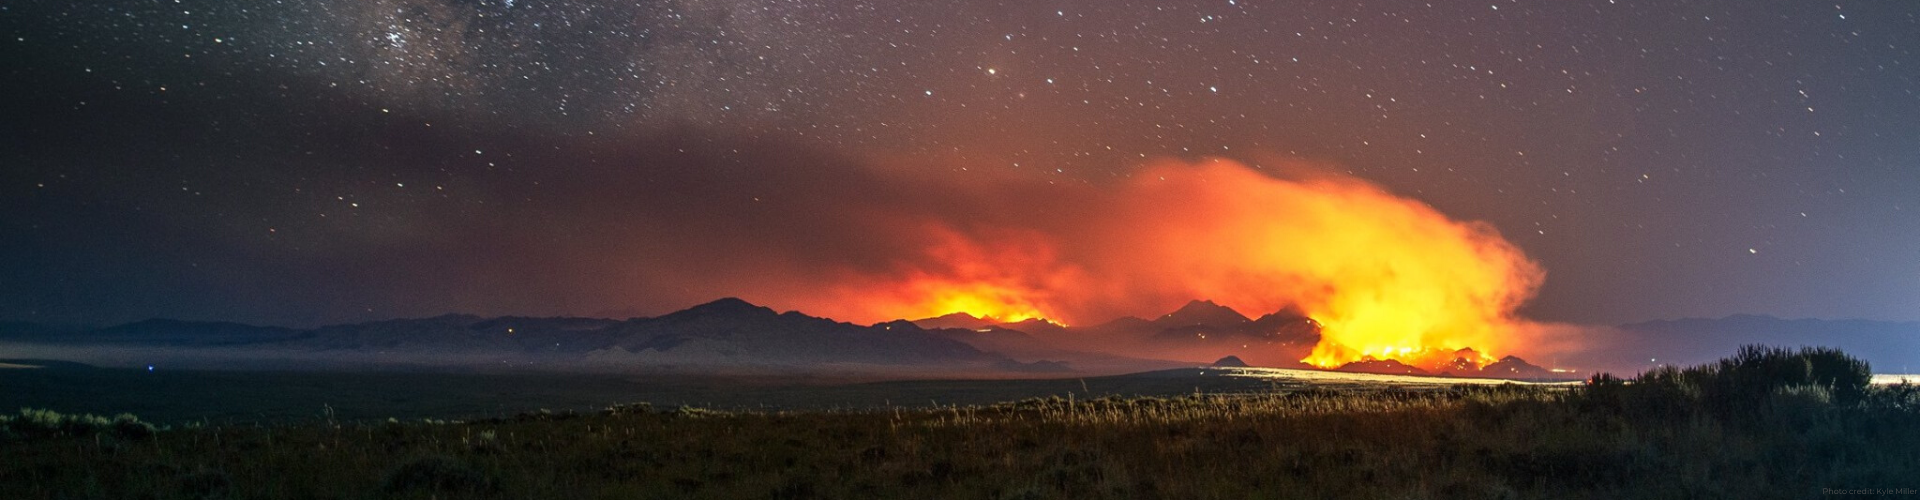 Timelapse photo of prescribed fire at night by Kyle Miller.